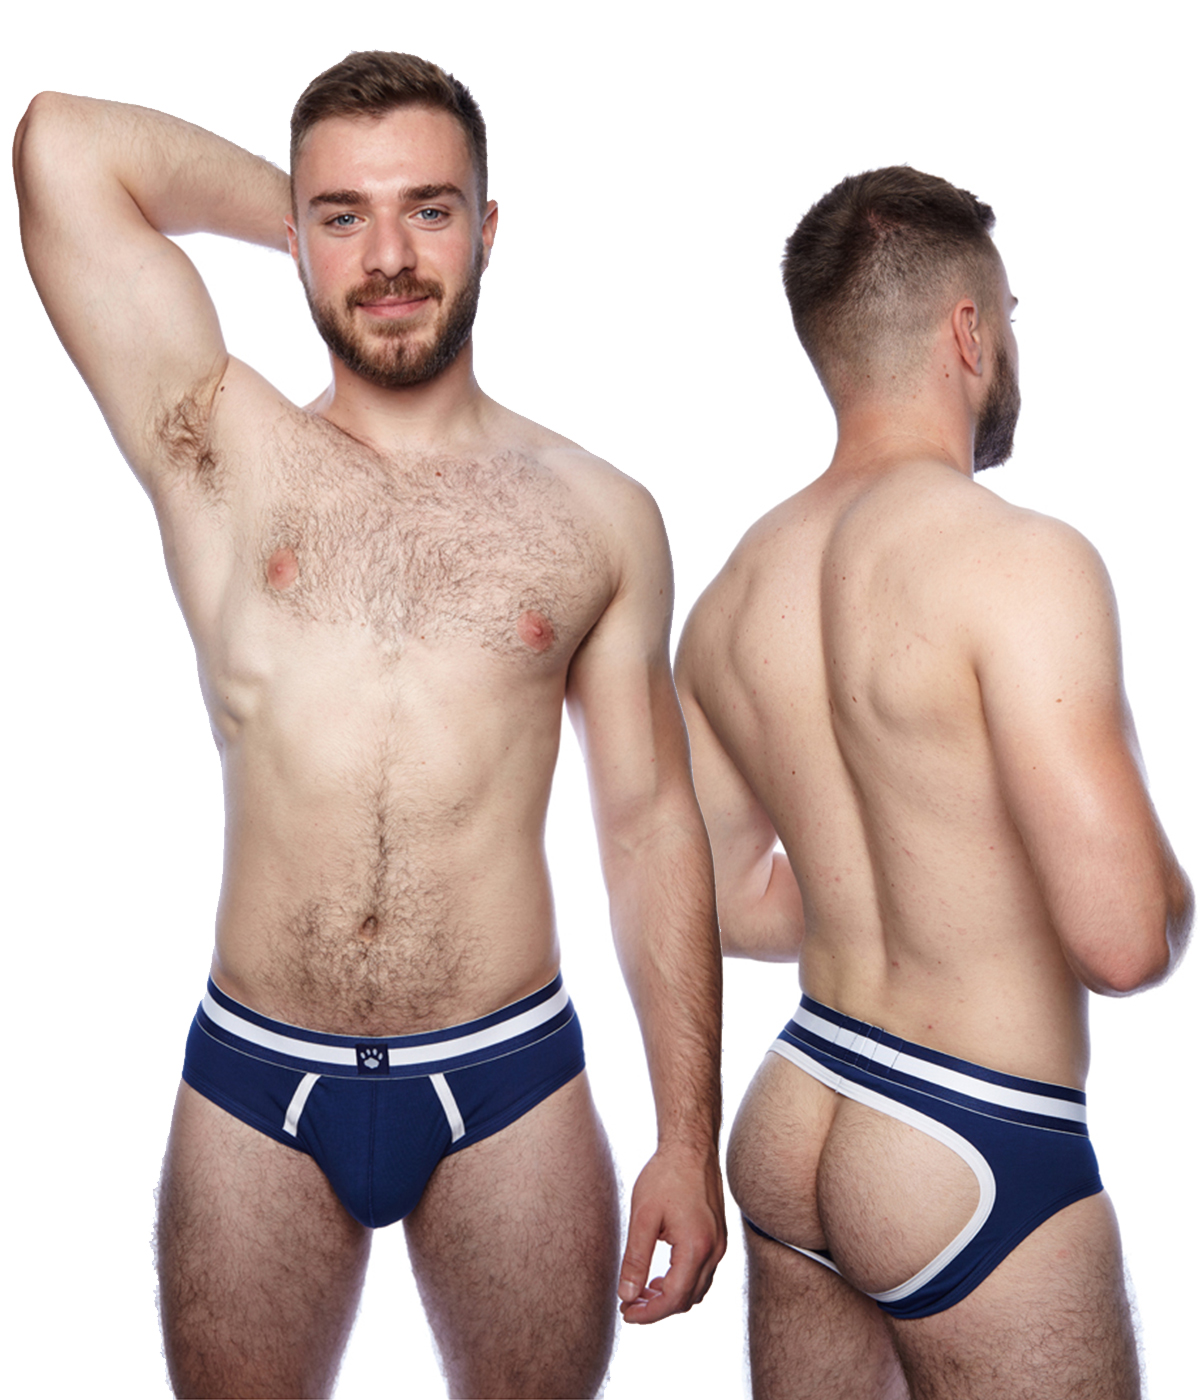 PROWLER CLASSIC BACKLESS BRIEF NAVY/WHITE 